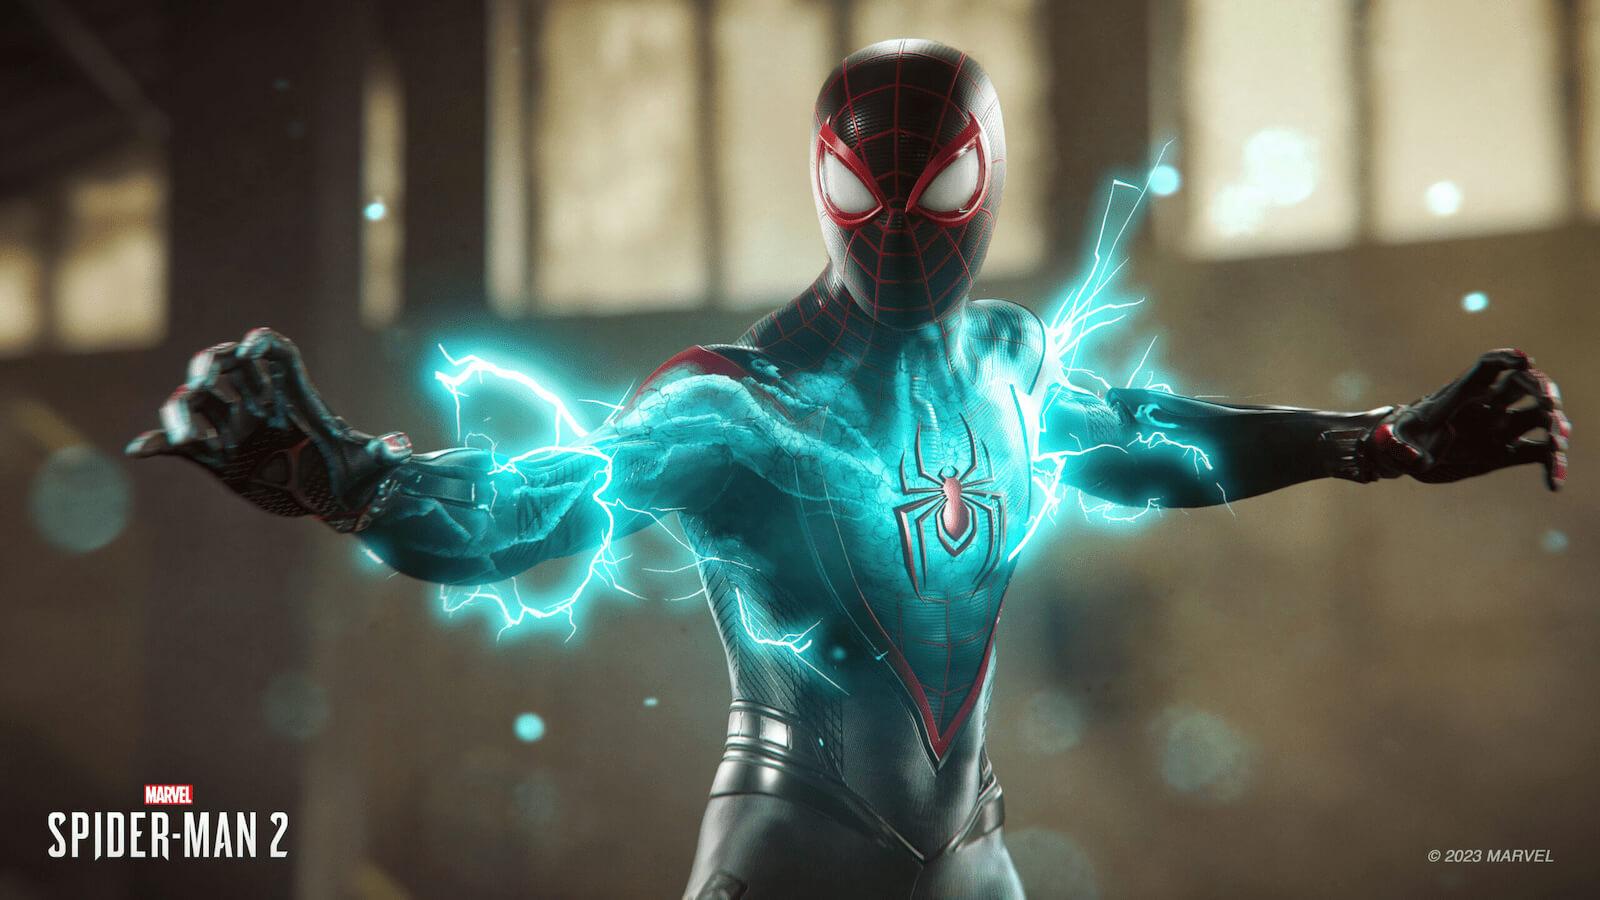 Marvel's Spider-Man PC requirements: Minimum and recommended specs - Dexerto